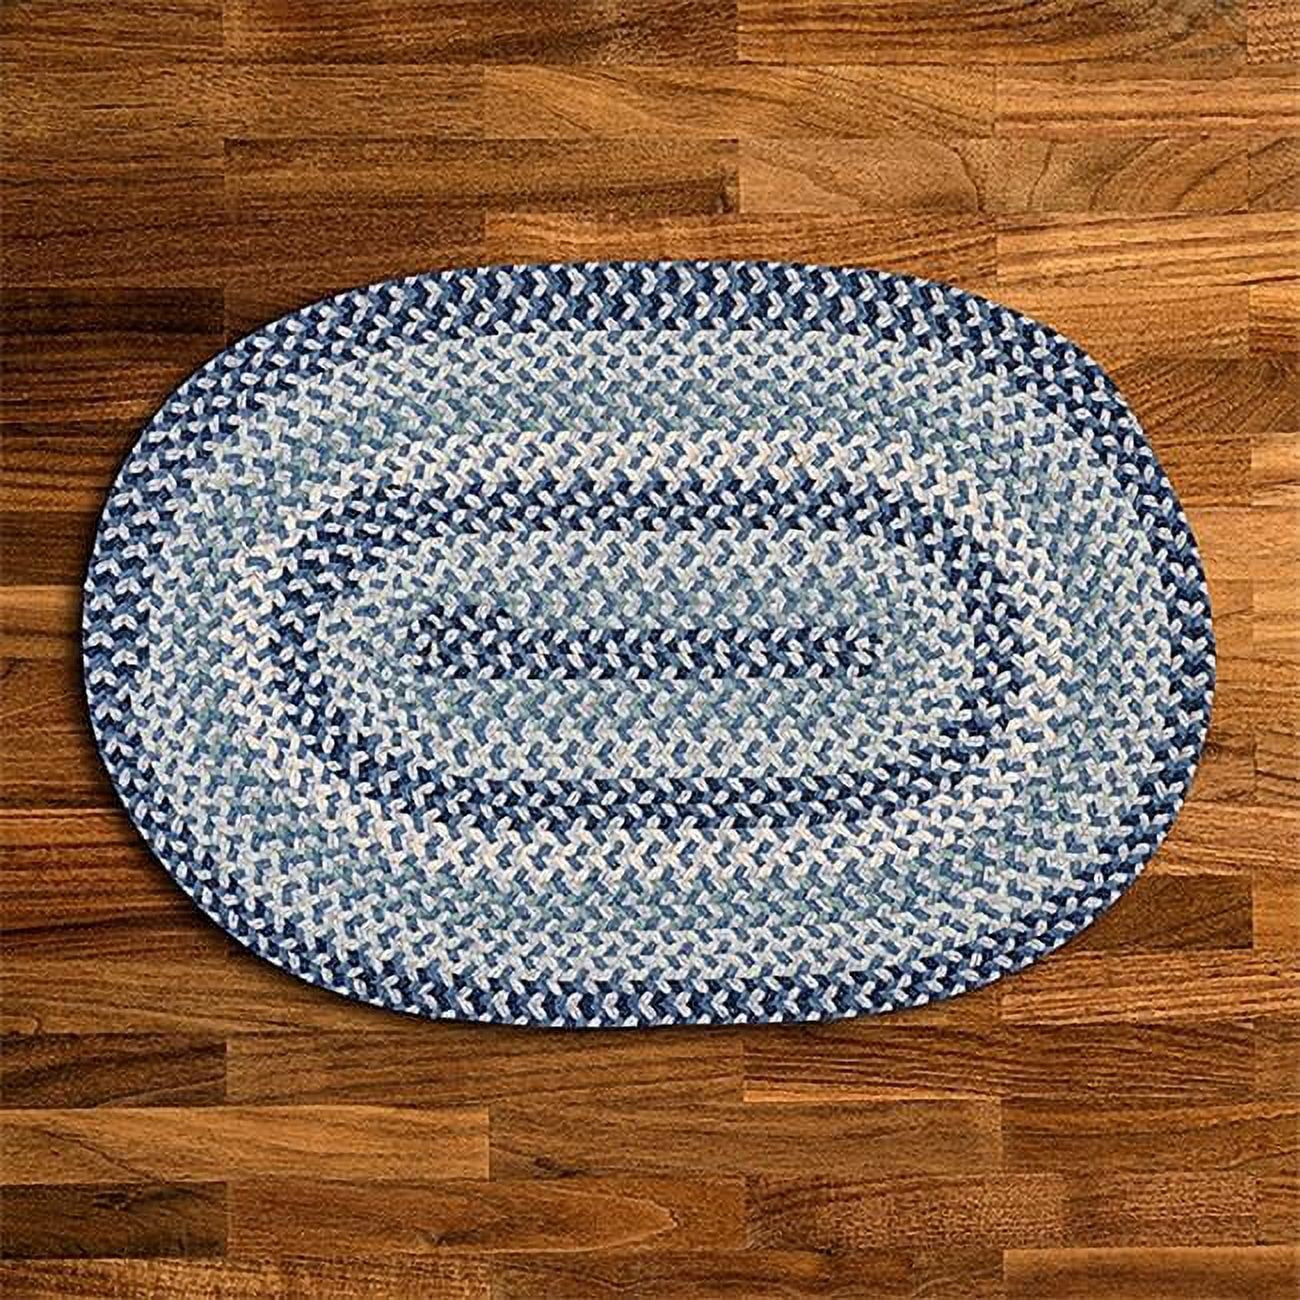 Bc53r060x084 5 X 7 Ft. Boston Common Oval Rug, Capeside Blue